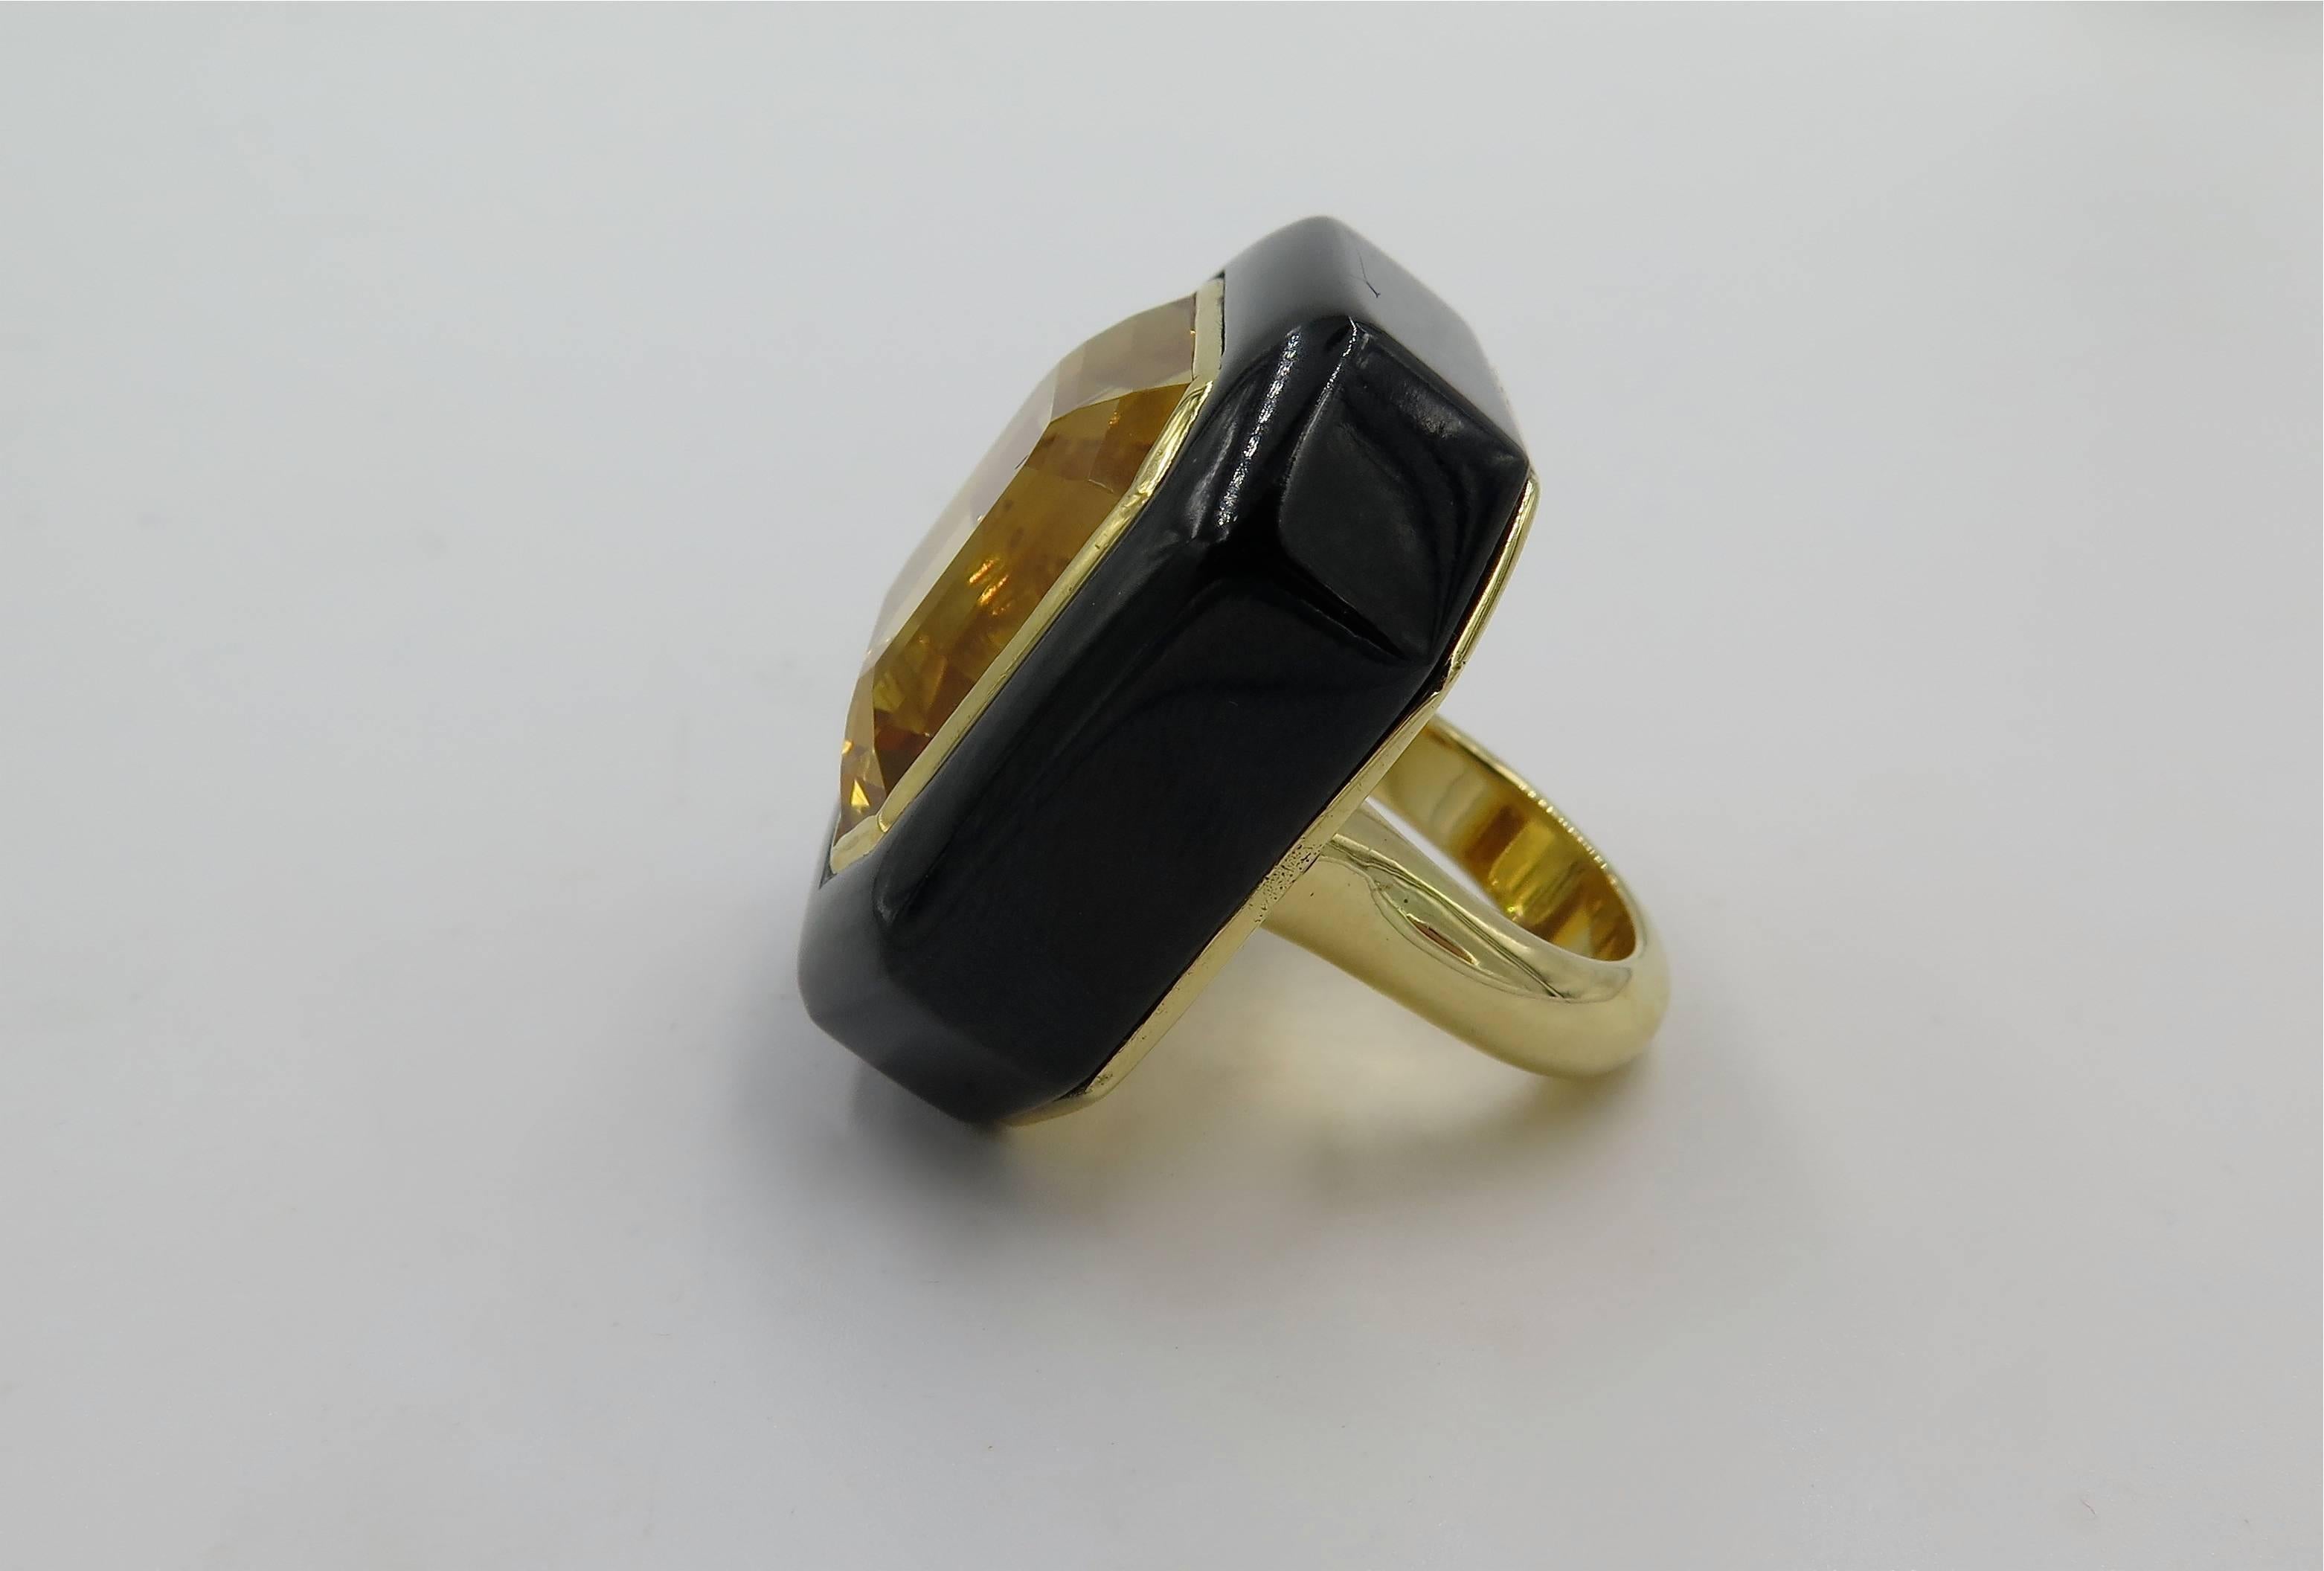 An 18 karat yellow gold, citrine and black jade ring. Centering an emerald cut citrine, weighing 45.49 carats within a black jade bezel, with polished gold shank. Size 6. Gross weight is approximately 51.9 grams. Designed by Marcella Ciceri. 